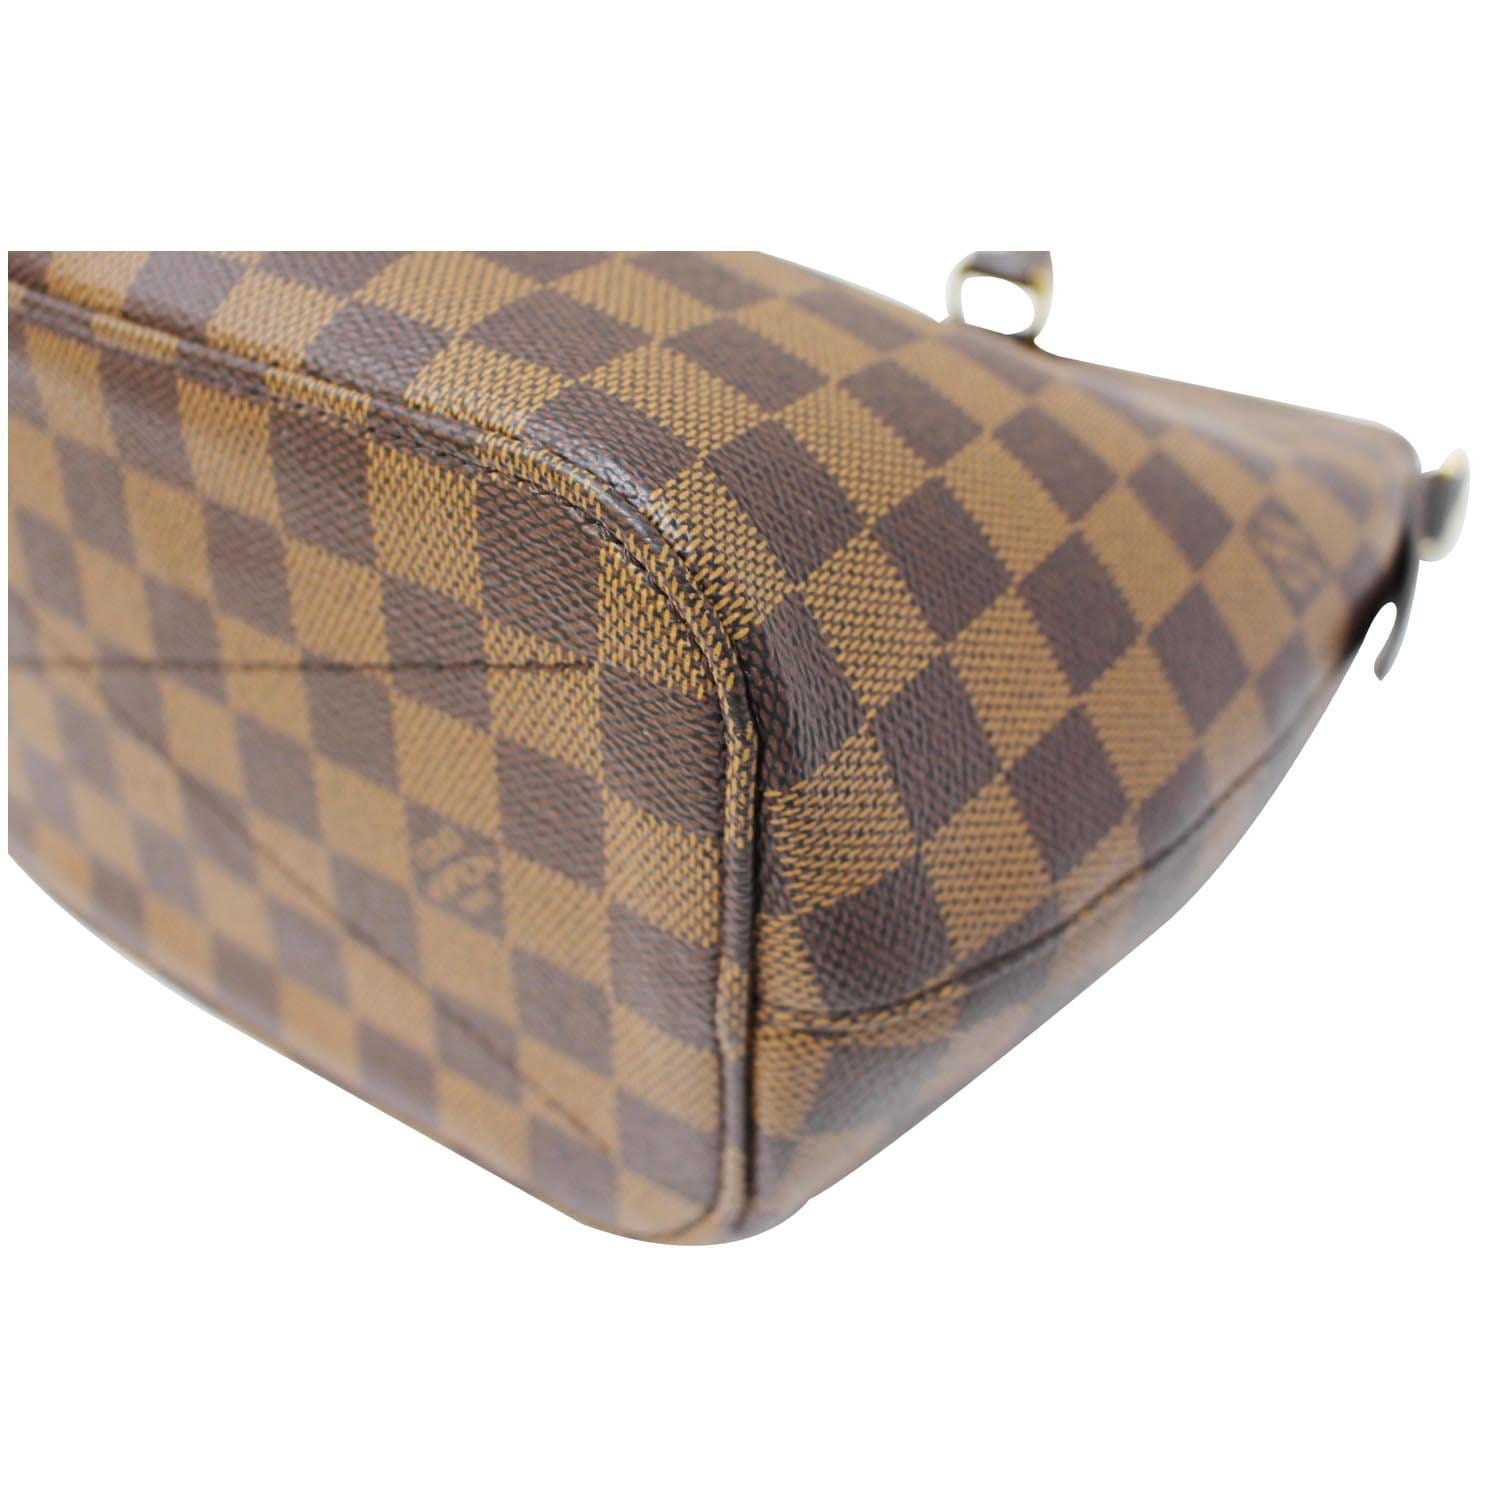 Vintage Louis Vuitton Luggage and Travel Bags - 496 For Sale at